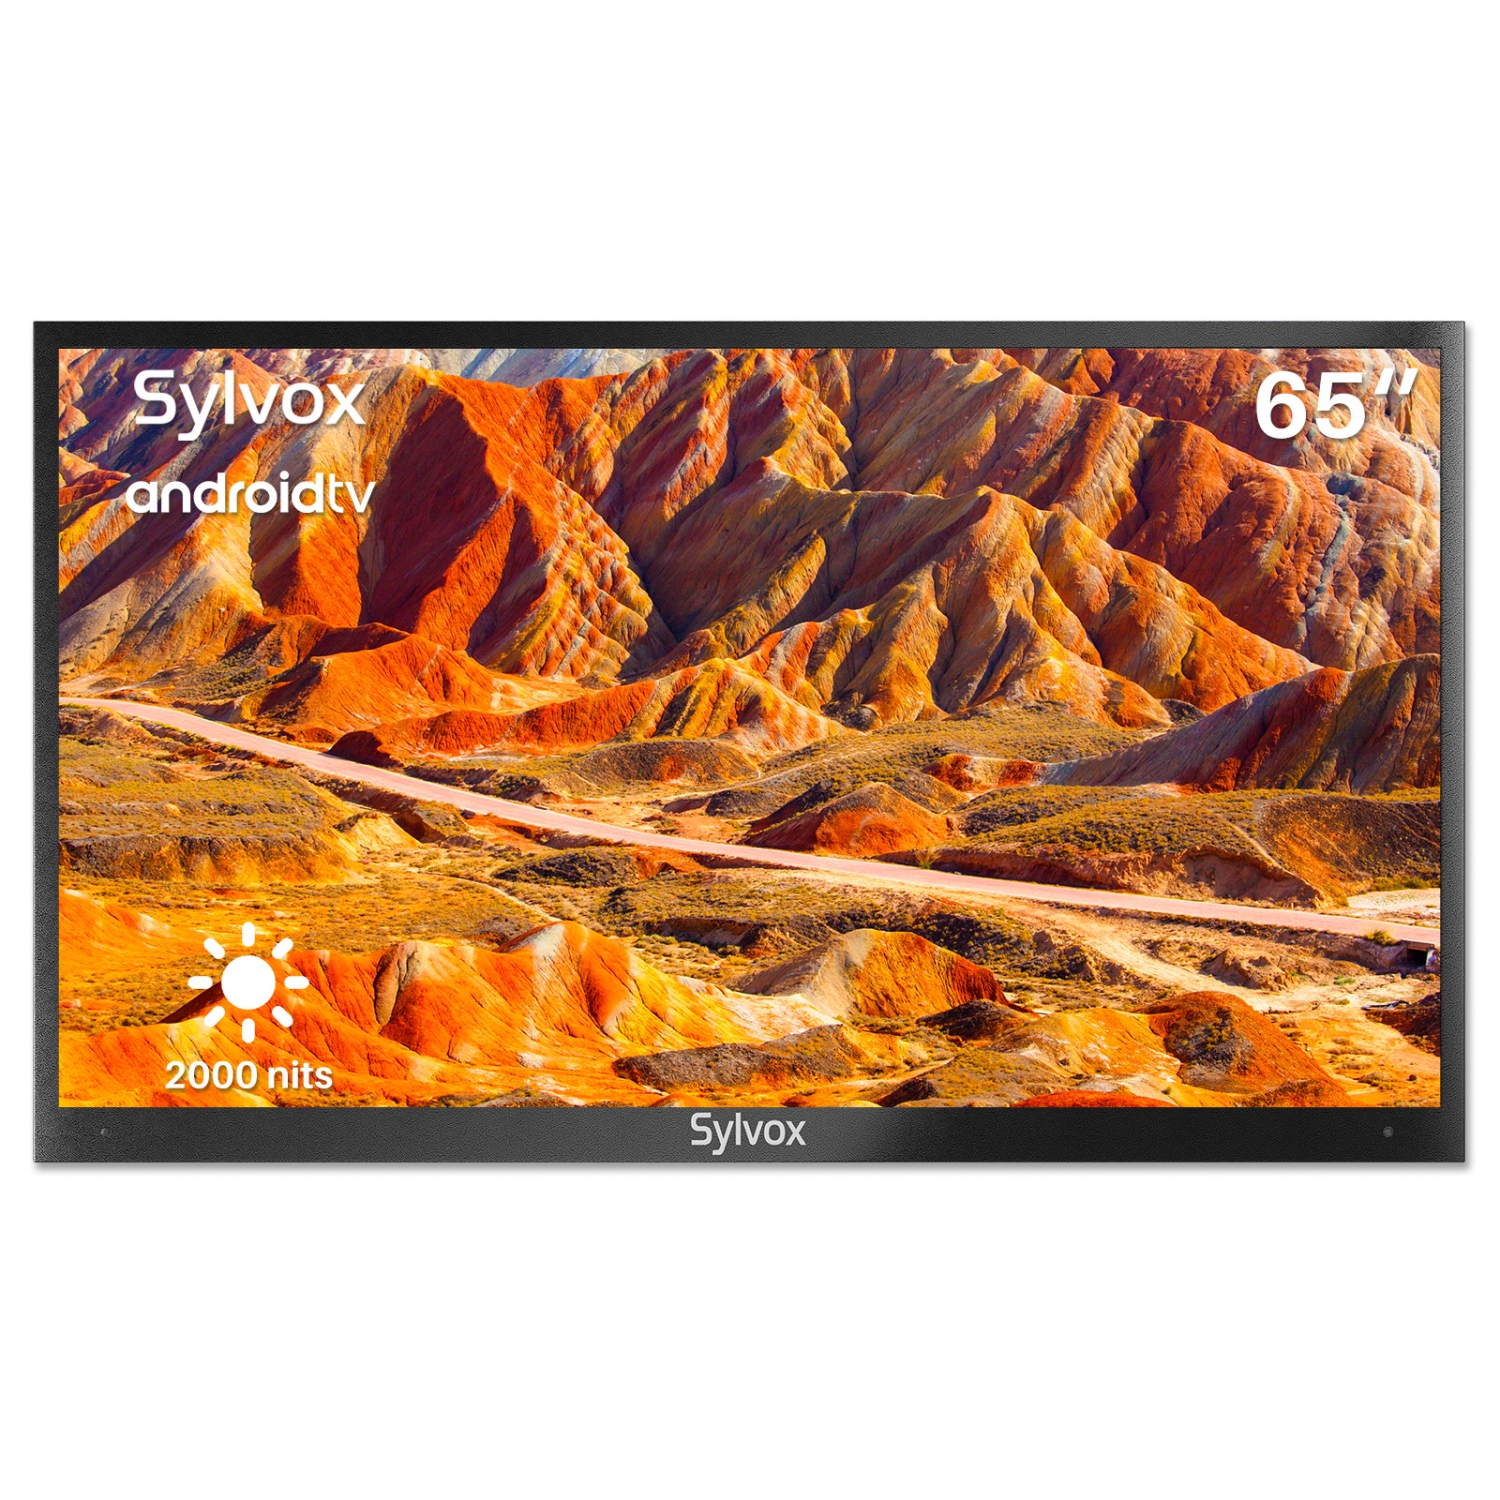 SYLVOX Outdoor TV Pool Pro Series 65 inch Smart Outside TV 2000nits Waterproof Full Sun Outdoor Television,Built-in Google Play Voice Assistant and Chromecast